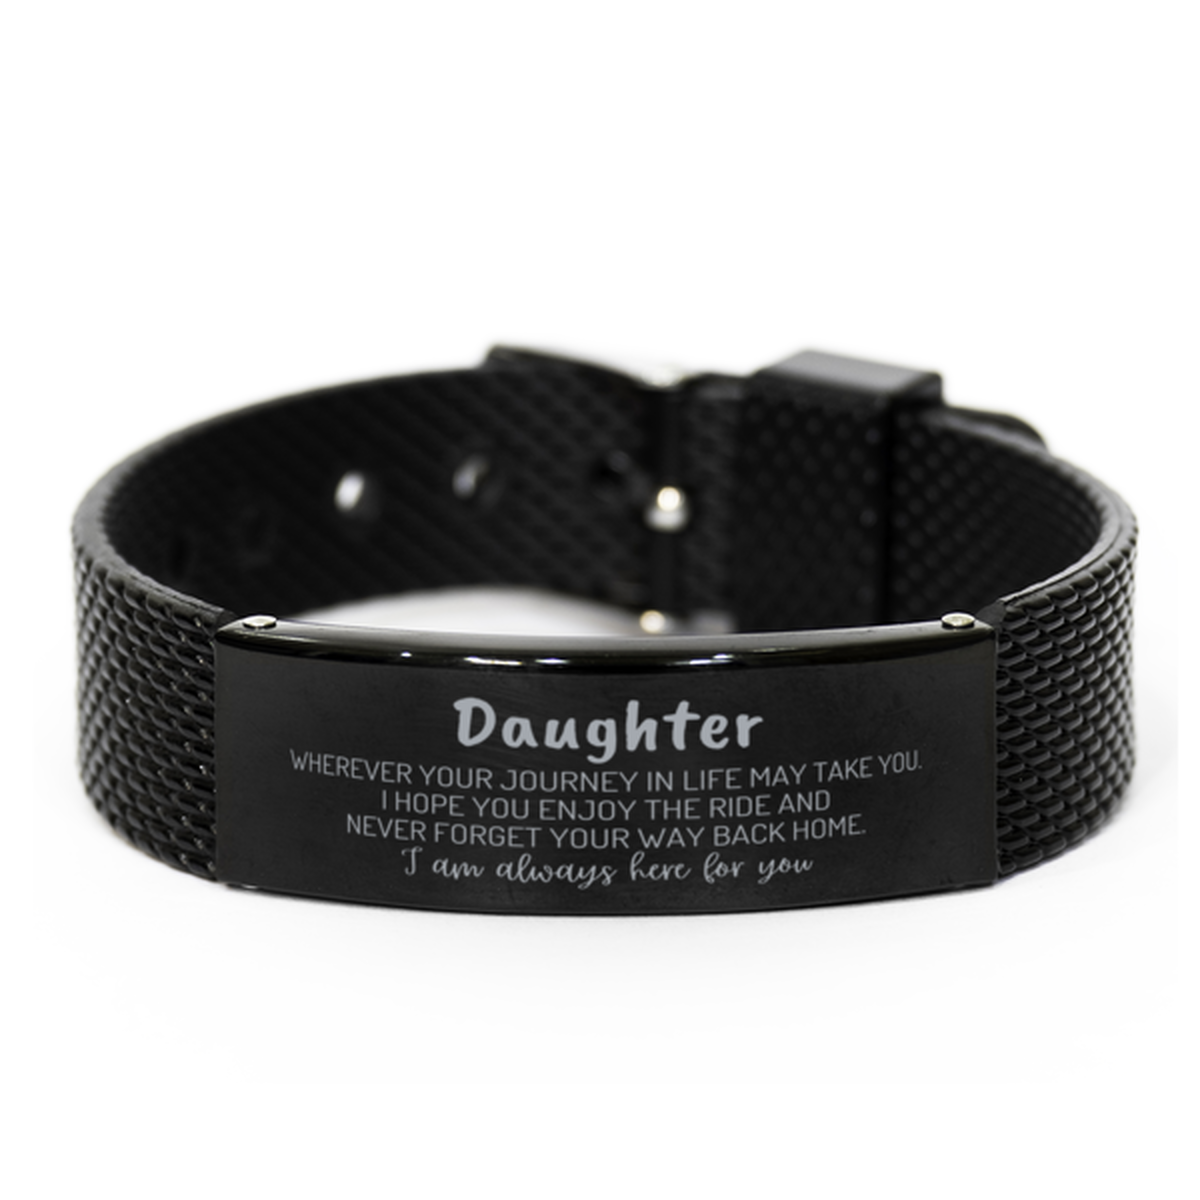 Daughter wherever your journey in life may take you, I am always here for you Daughter Black Shark Mesh Bracelet, Awesome Christmas Gifts For Daughter, Daughter Birthday Gifts for Men Women Family Loved One